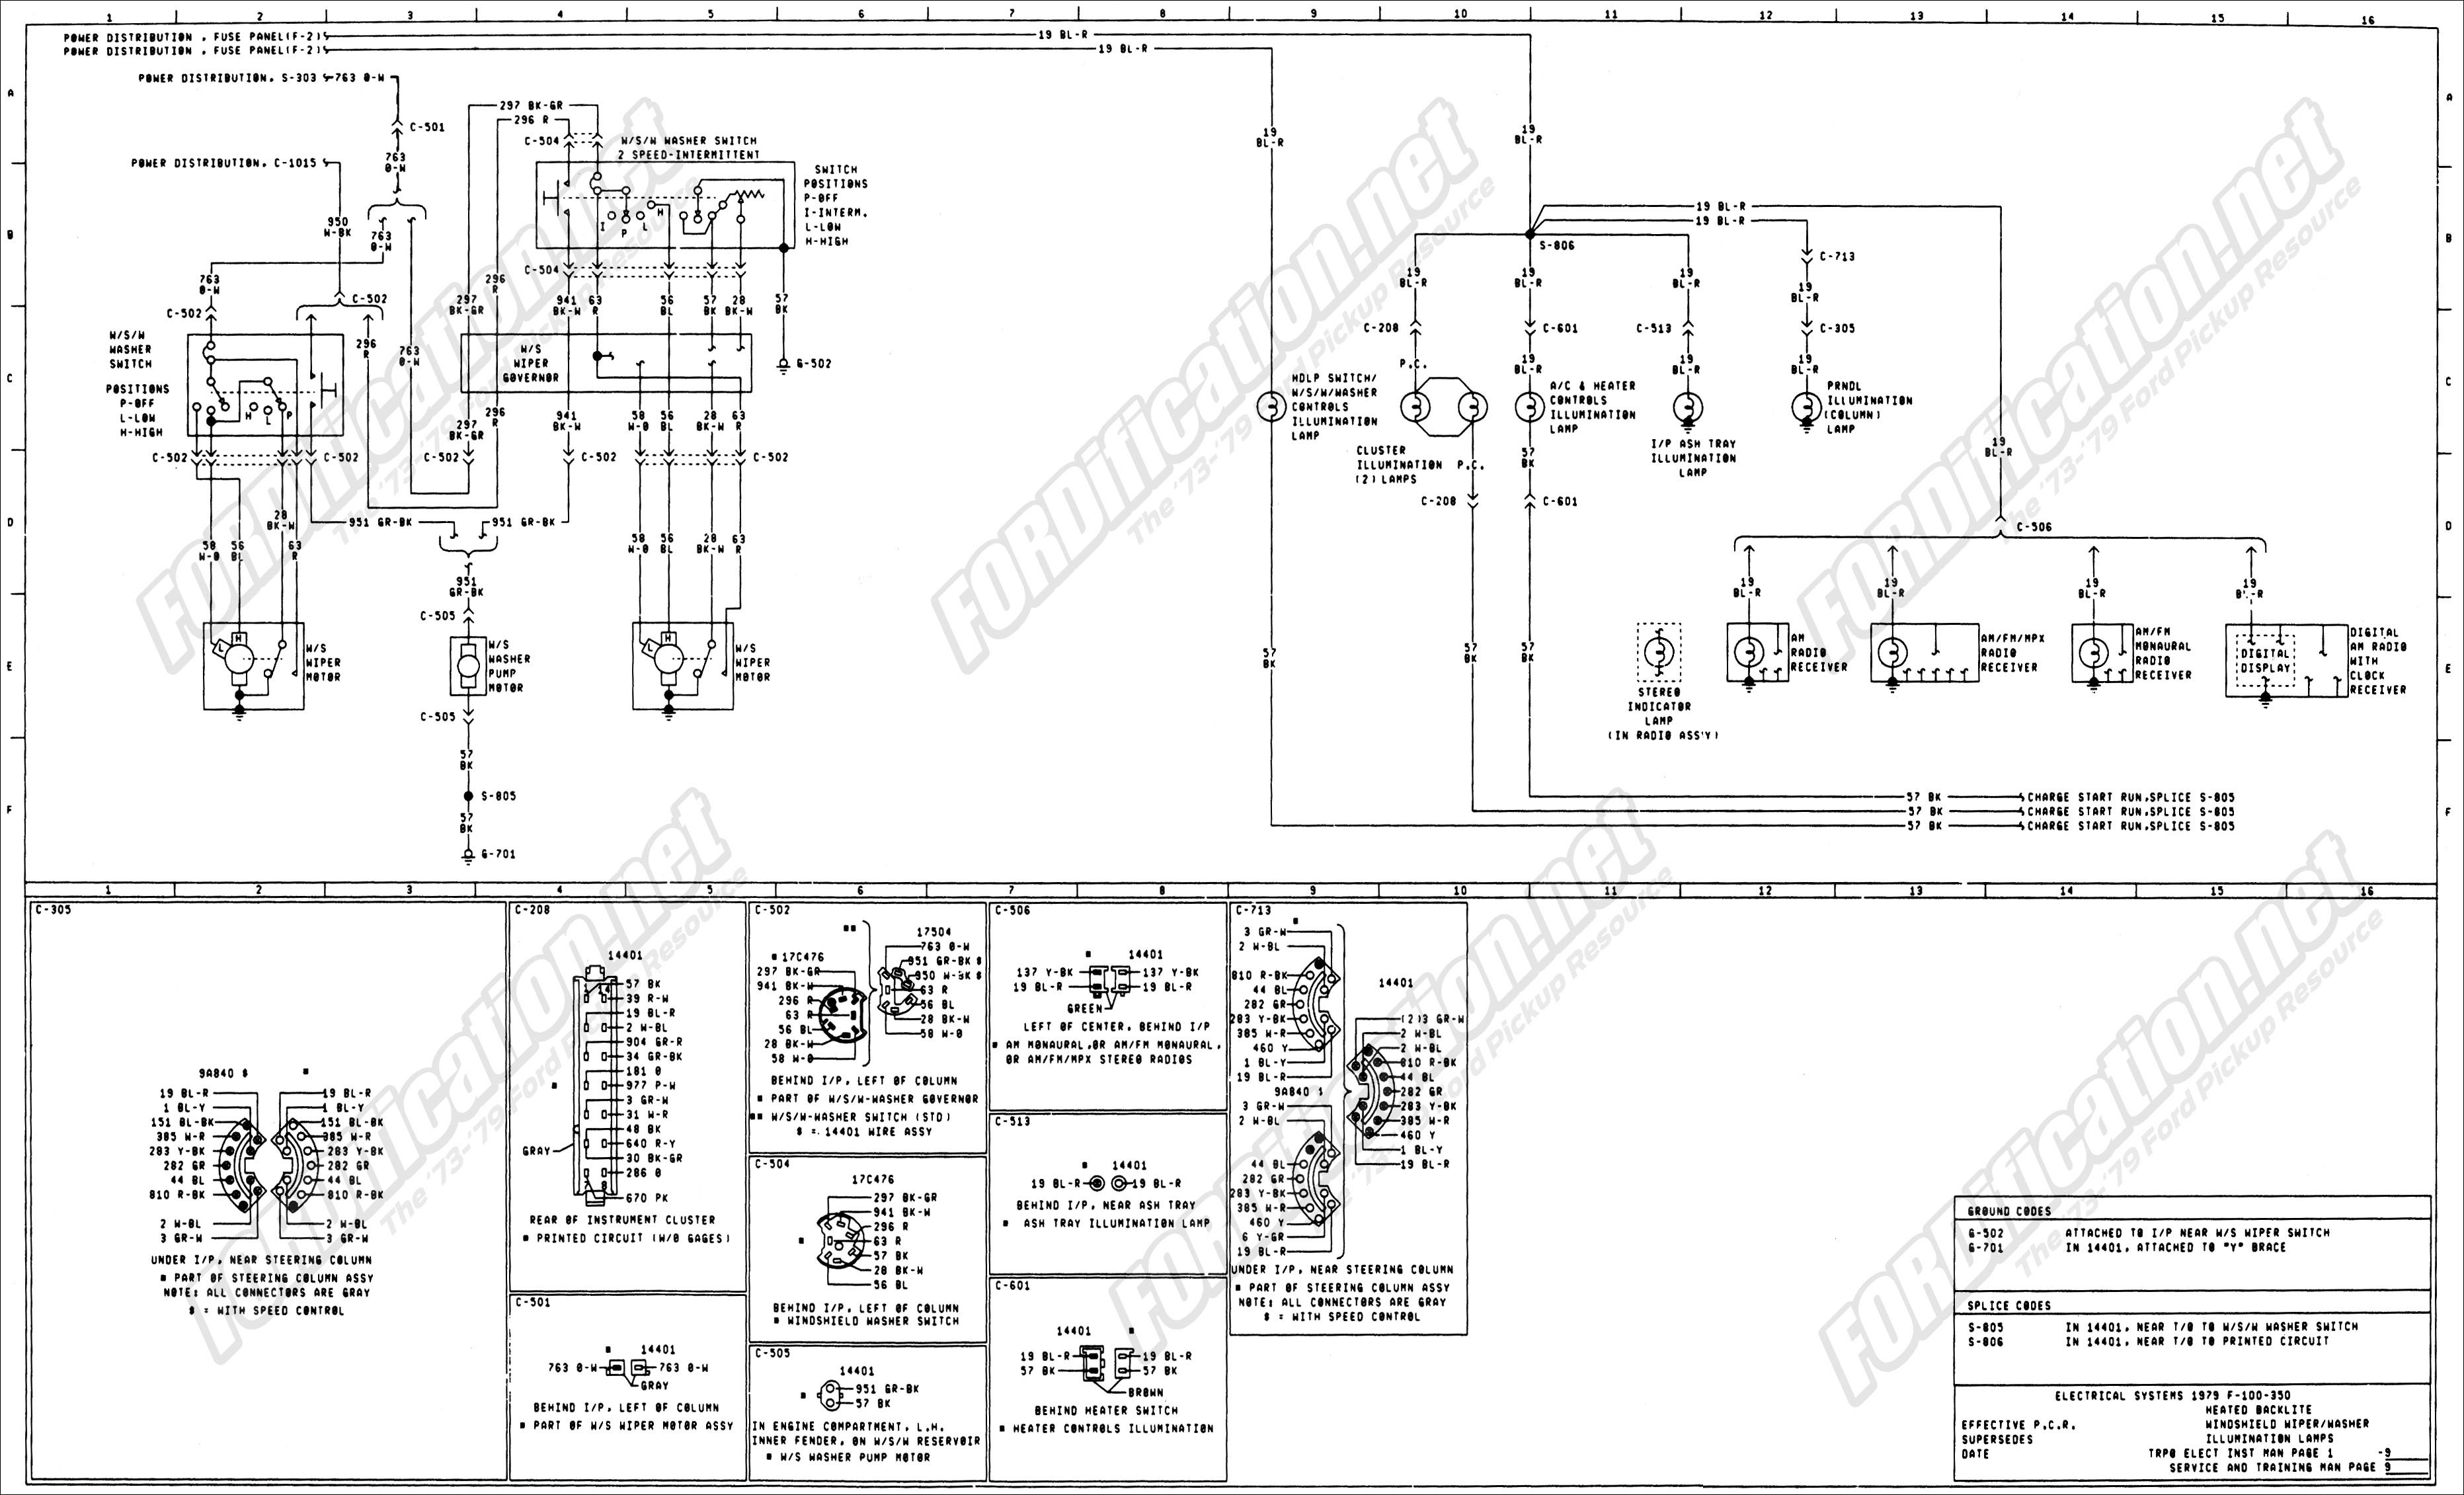 Ford 460 Engine Diagram 1973 1979 ford Truck Wiring Diagrams & Schematics fordification Of Ford 460 Engine Diagram